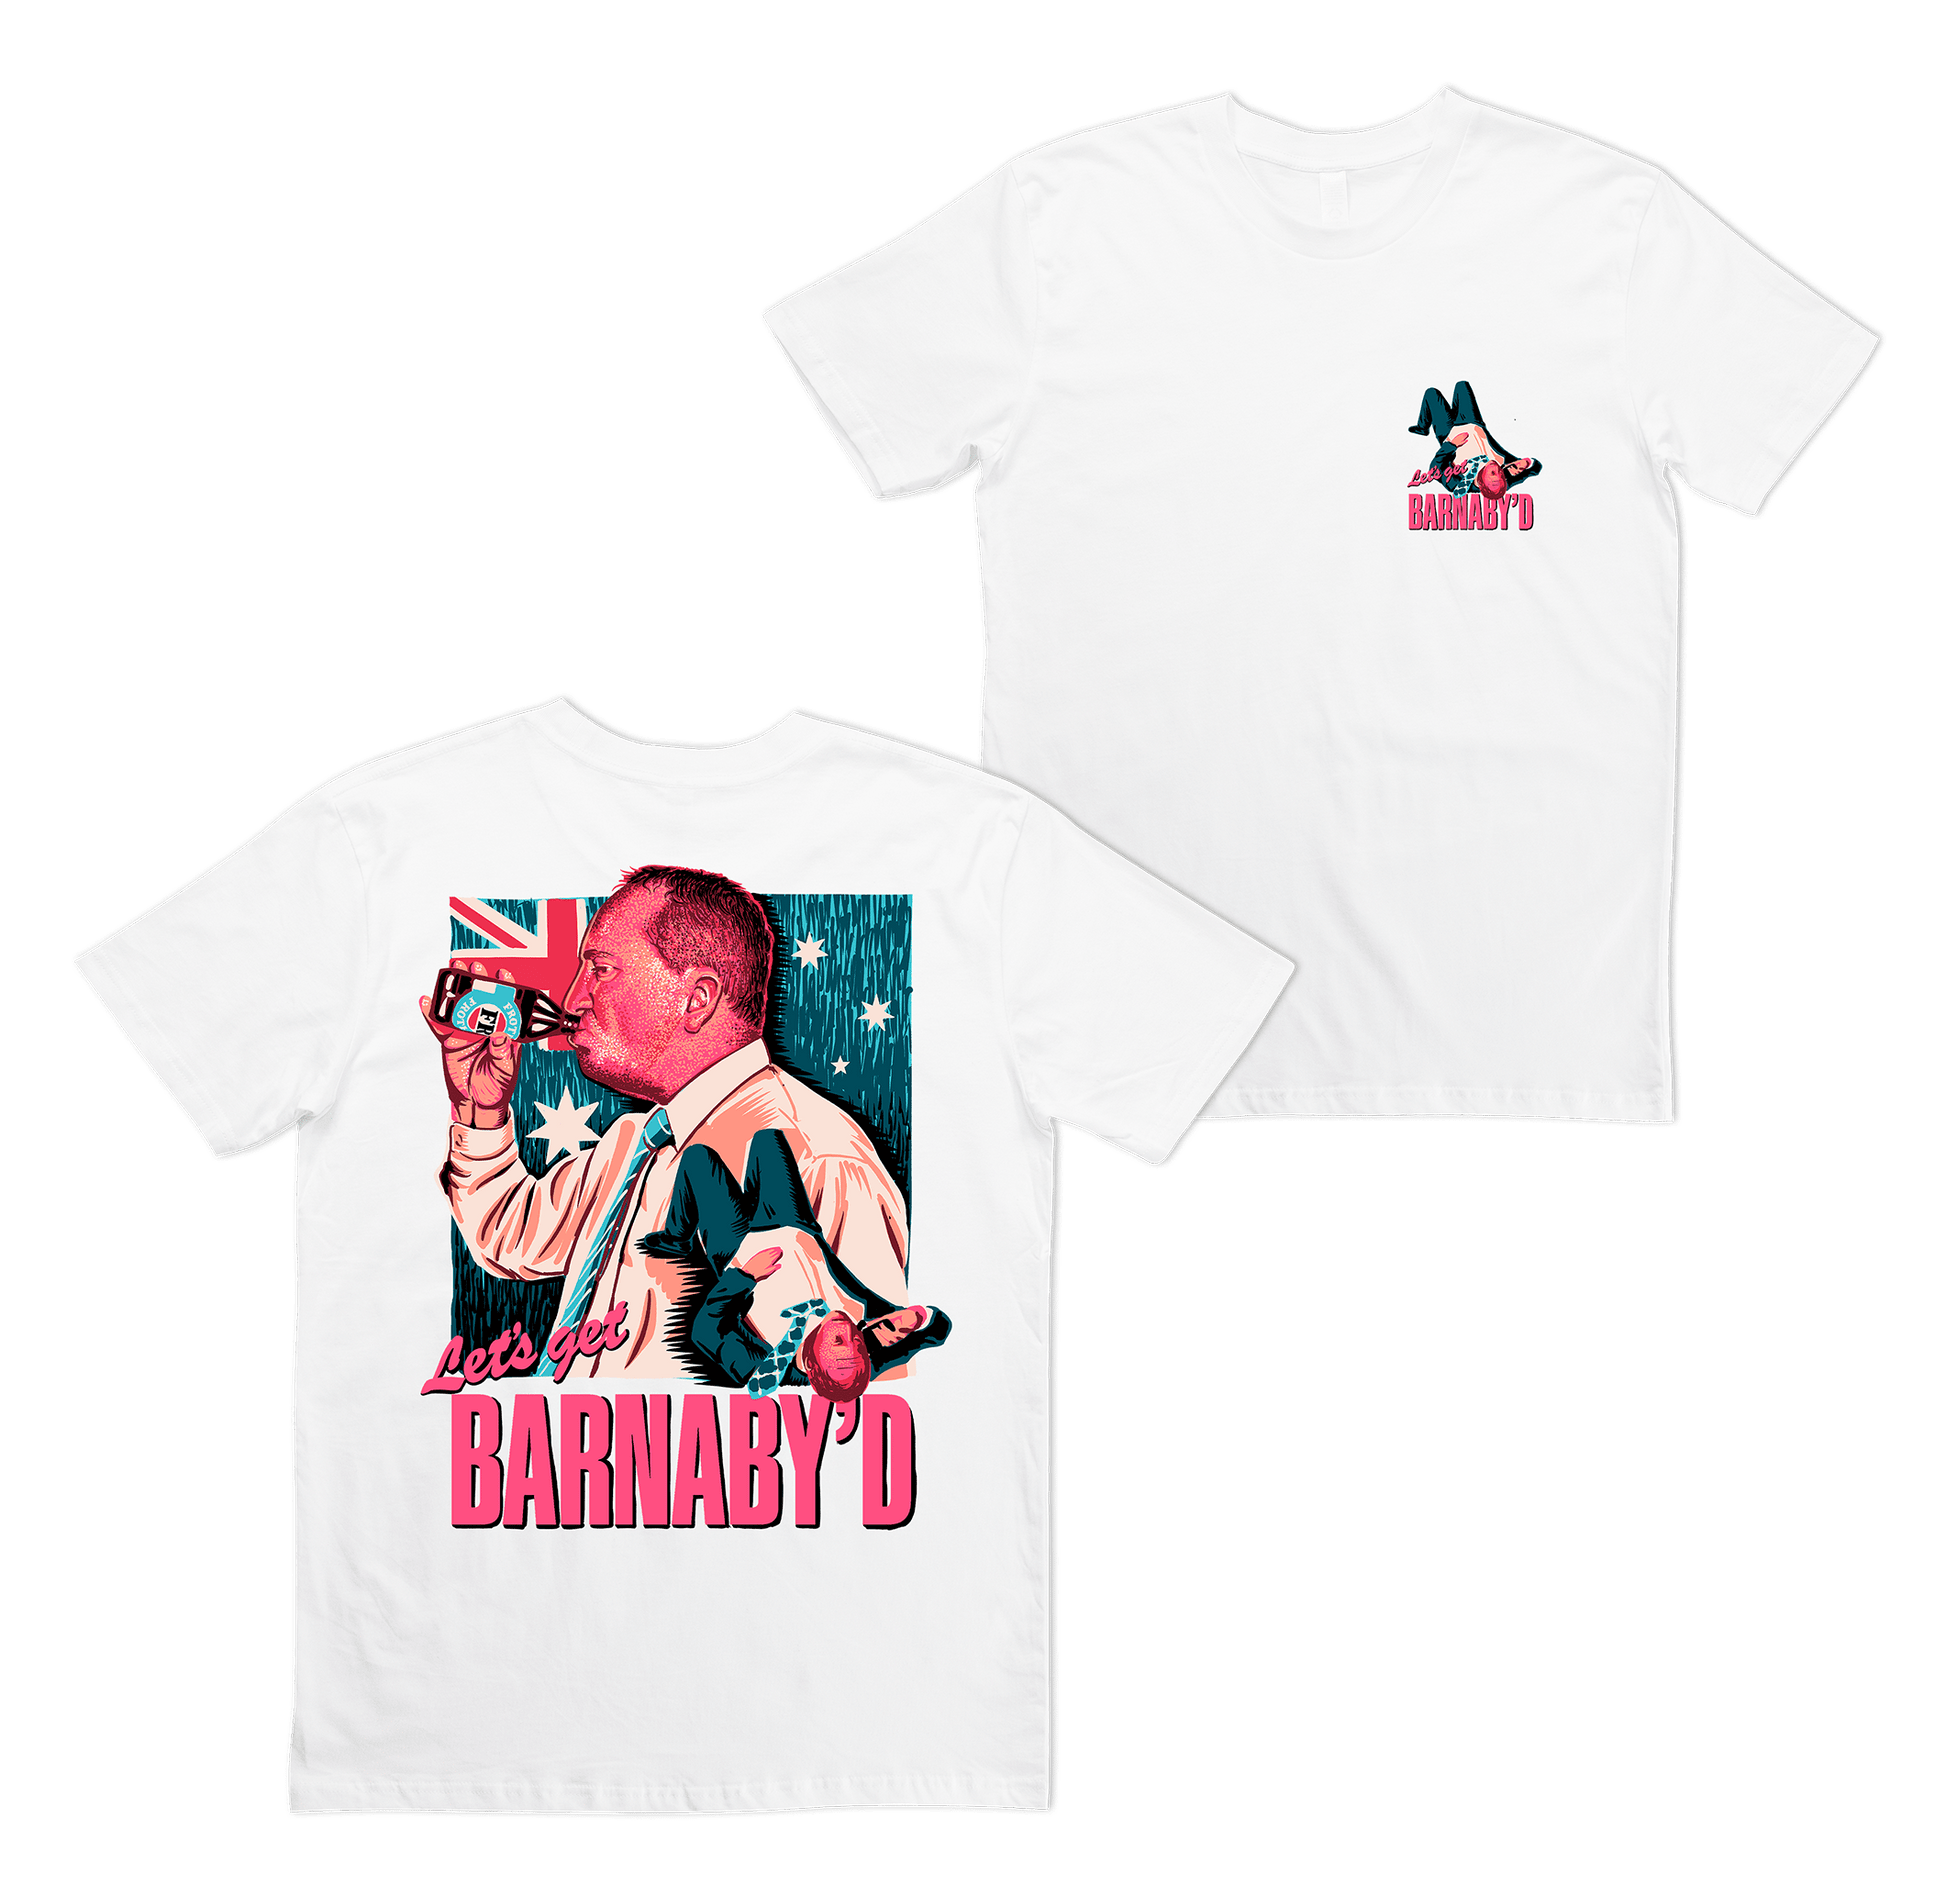 Let's Get Barnaby'd Tee T-Shirt Frothies